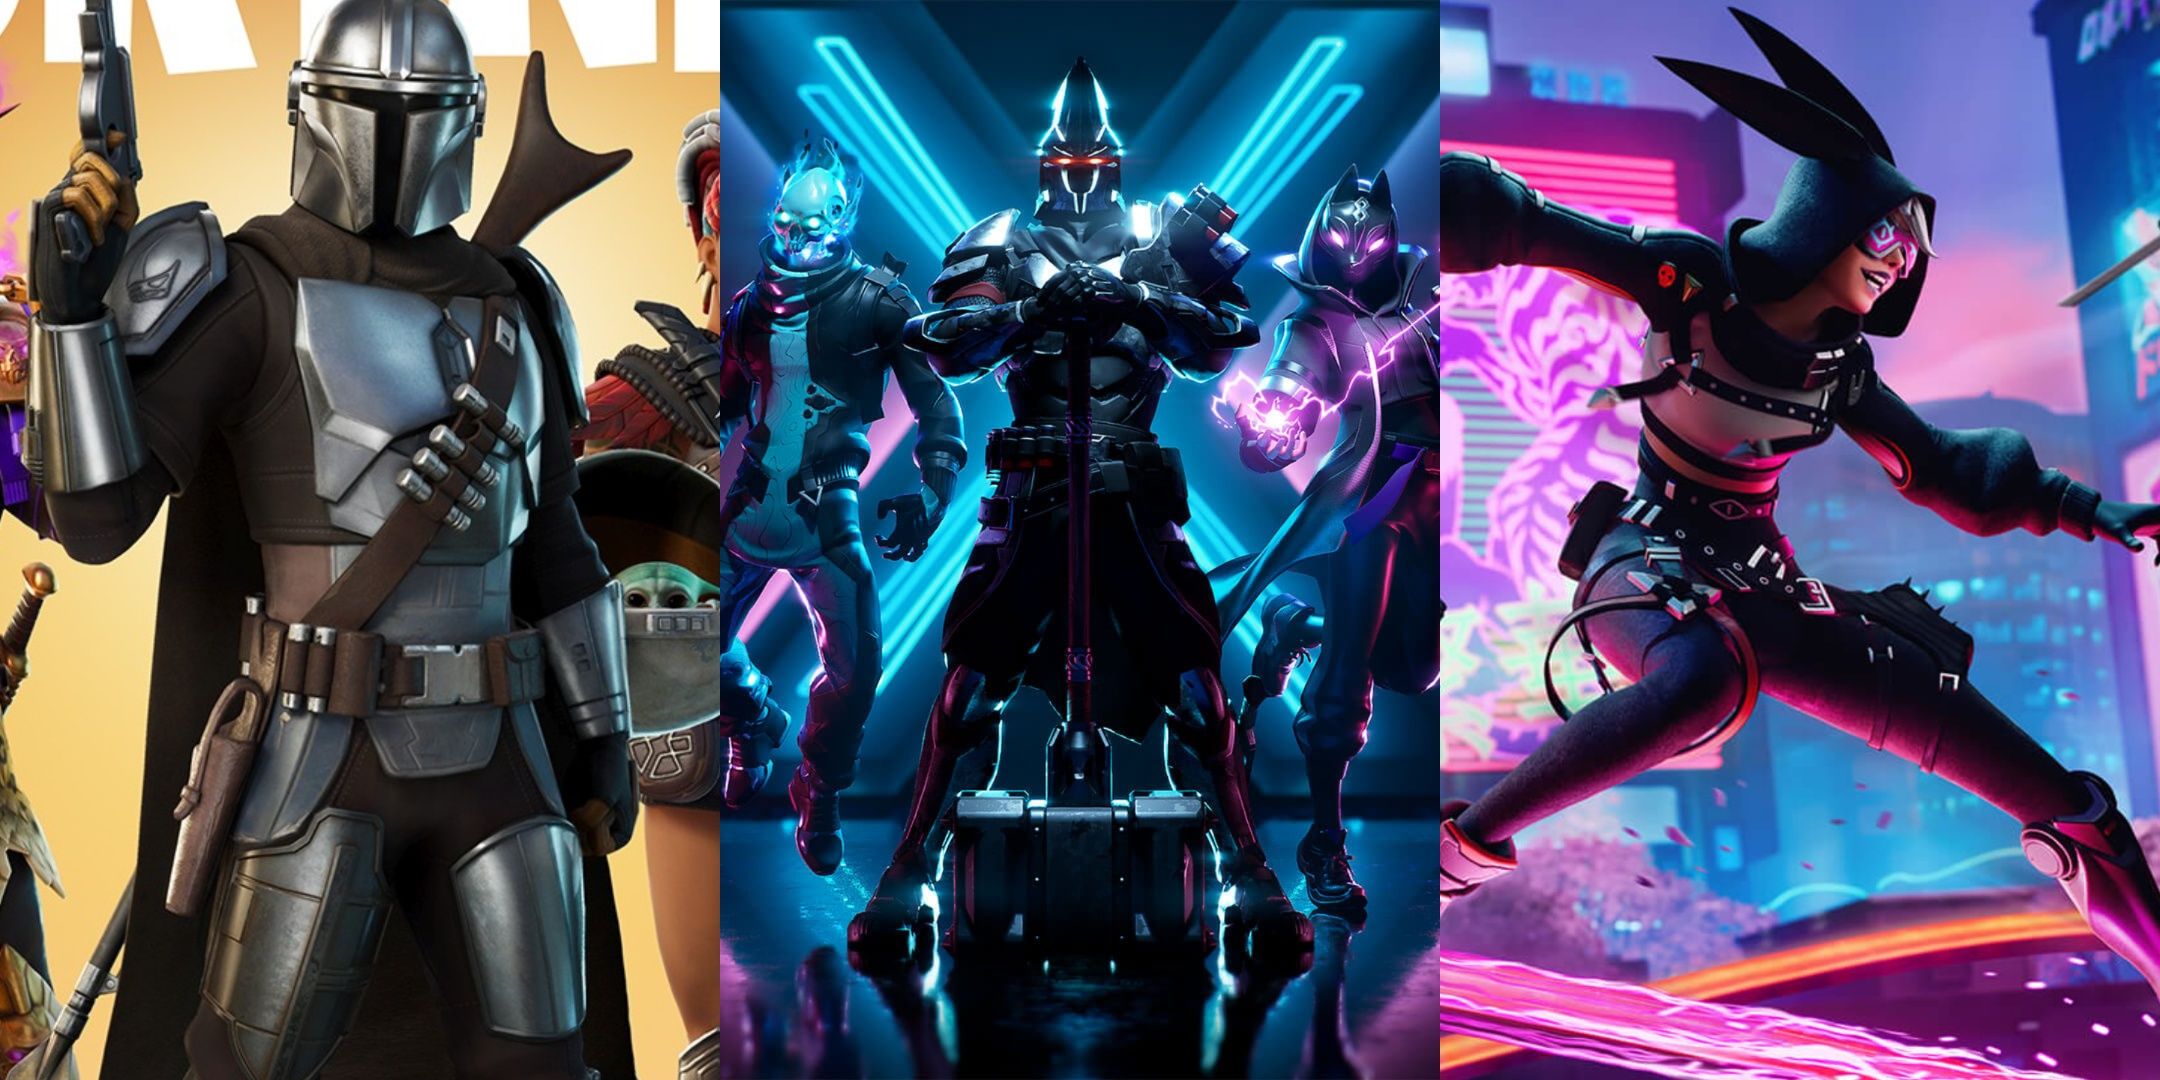 The Mandalorian, Highjwire and Season X Battle Pass from Fortnite